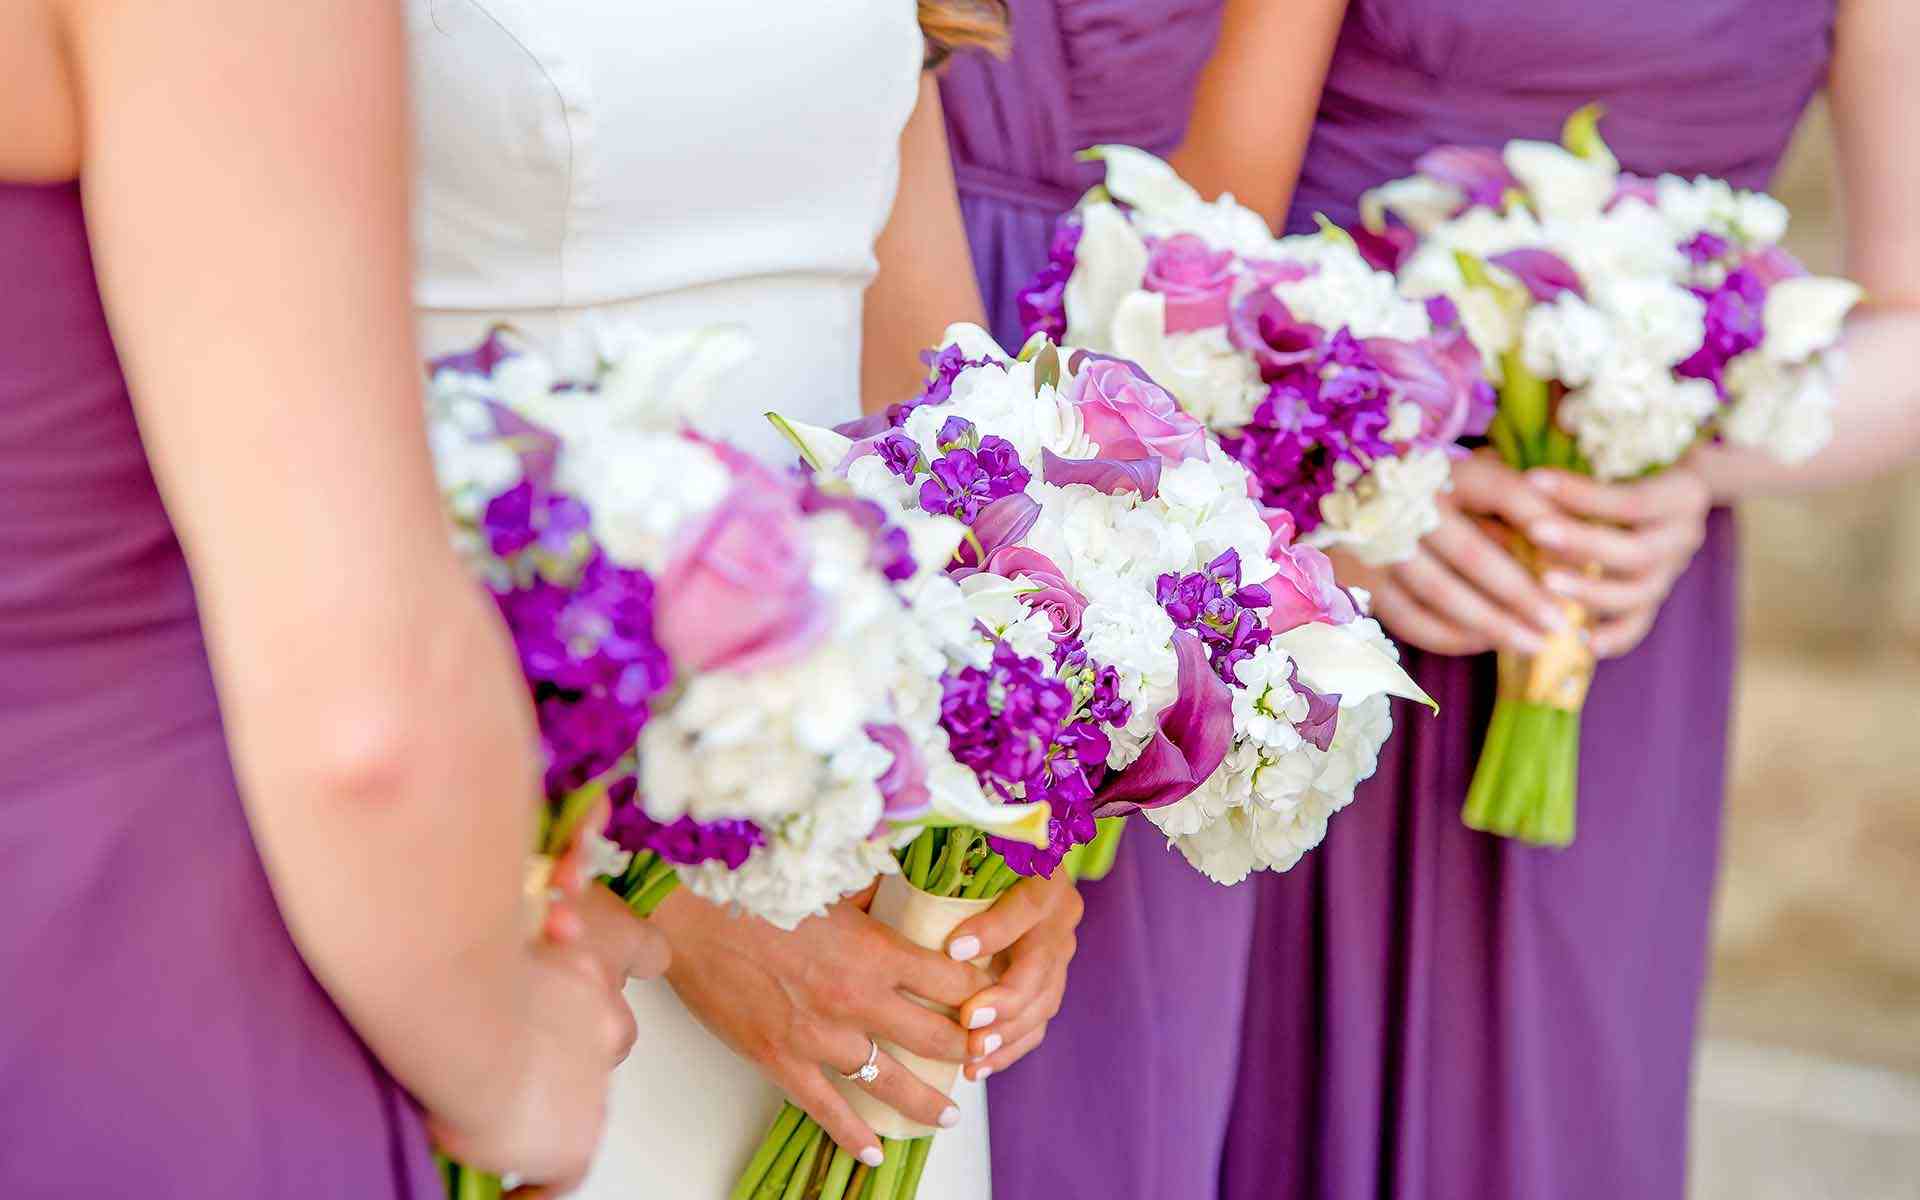 The-Bride-Among-The-Bridesmaids-With-Bouquets-Full-Of-Purple-And-White-Blooms-Popped